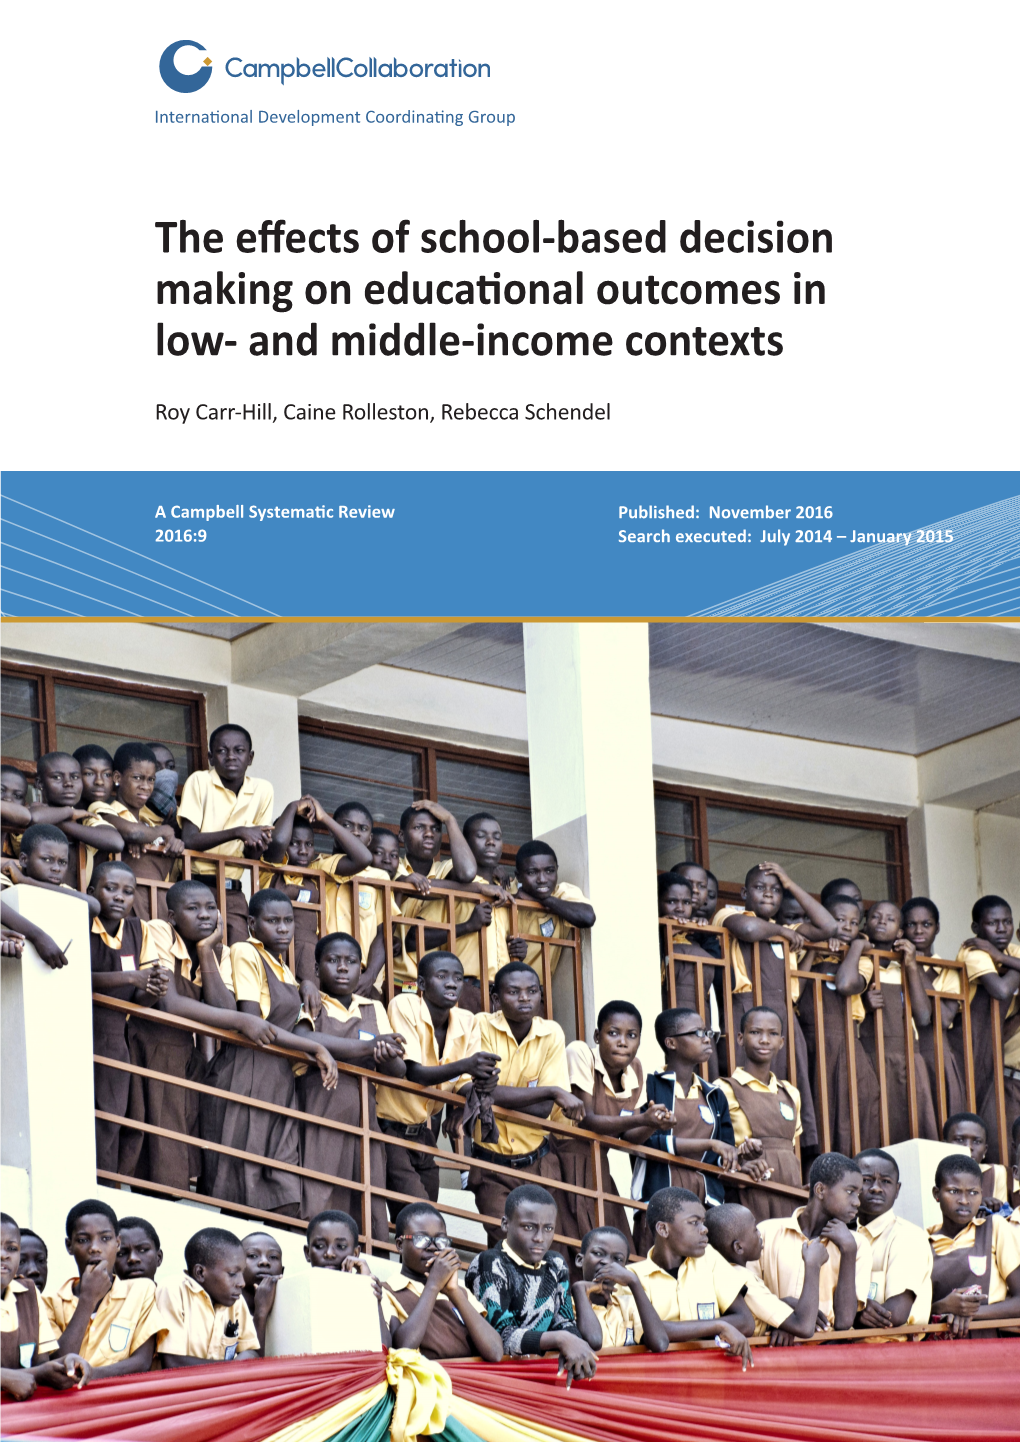 The Effects of School-Based Decision Making on Educational Outcomes in Low- and Middle-Income Contexts